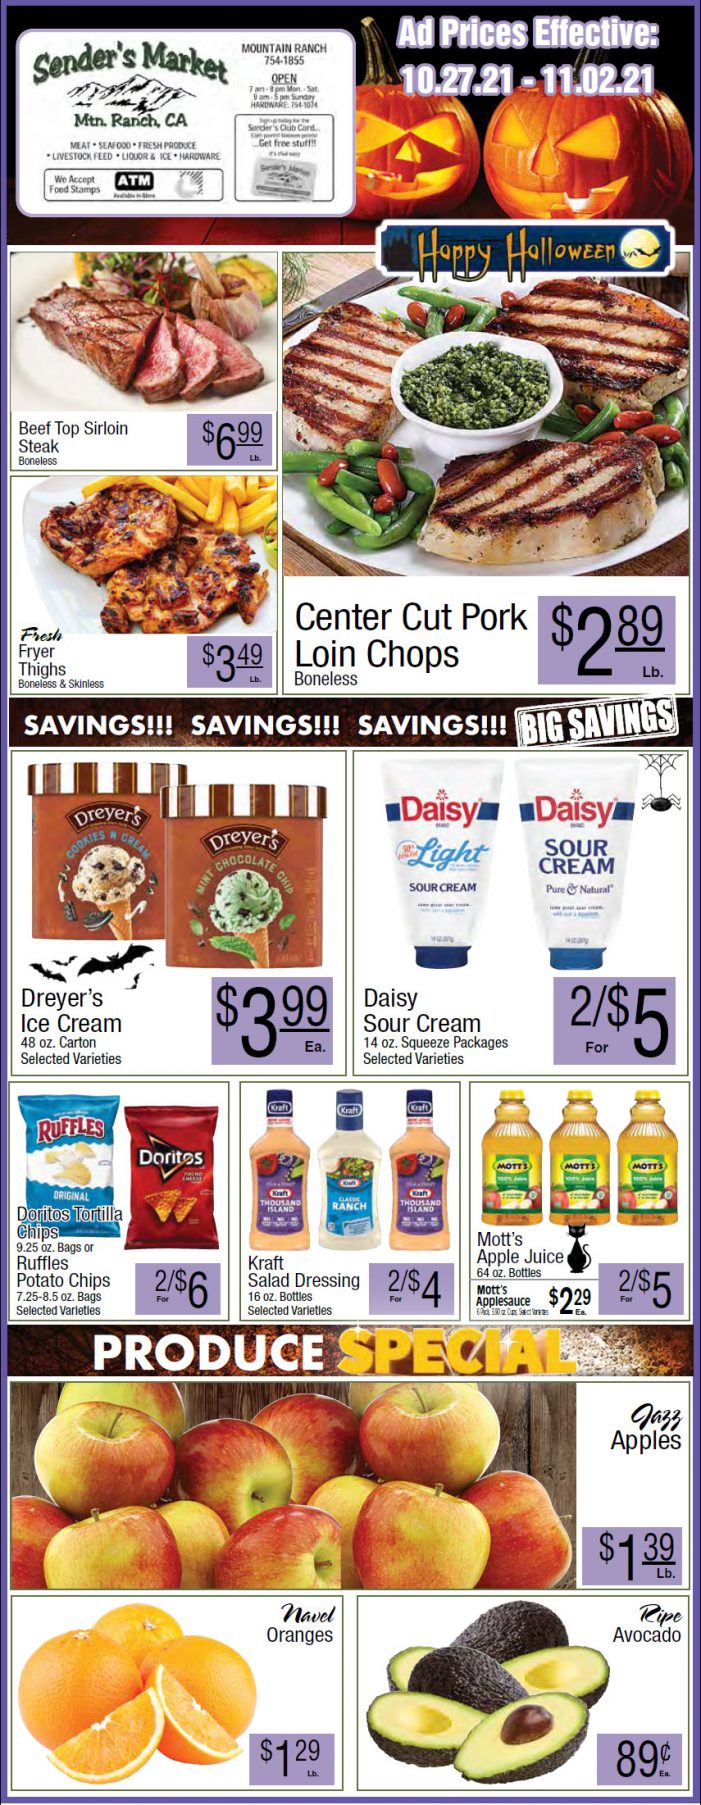 Sender’s Market’s Weekly Ad & Grocery Specials Through November 2nd! Shop Local & Save!